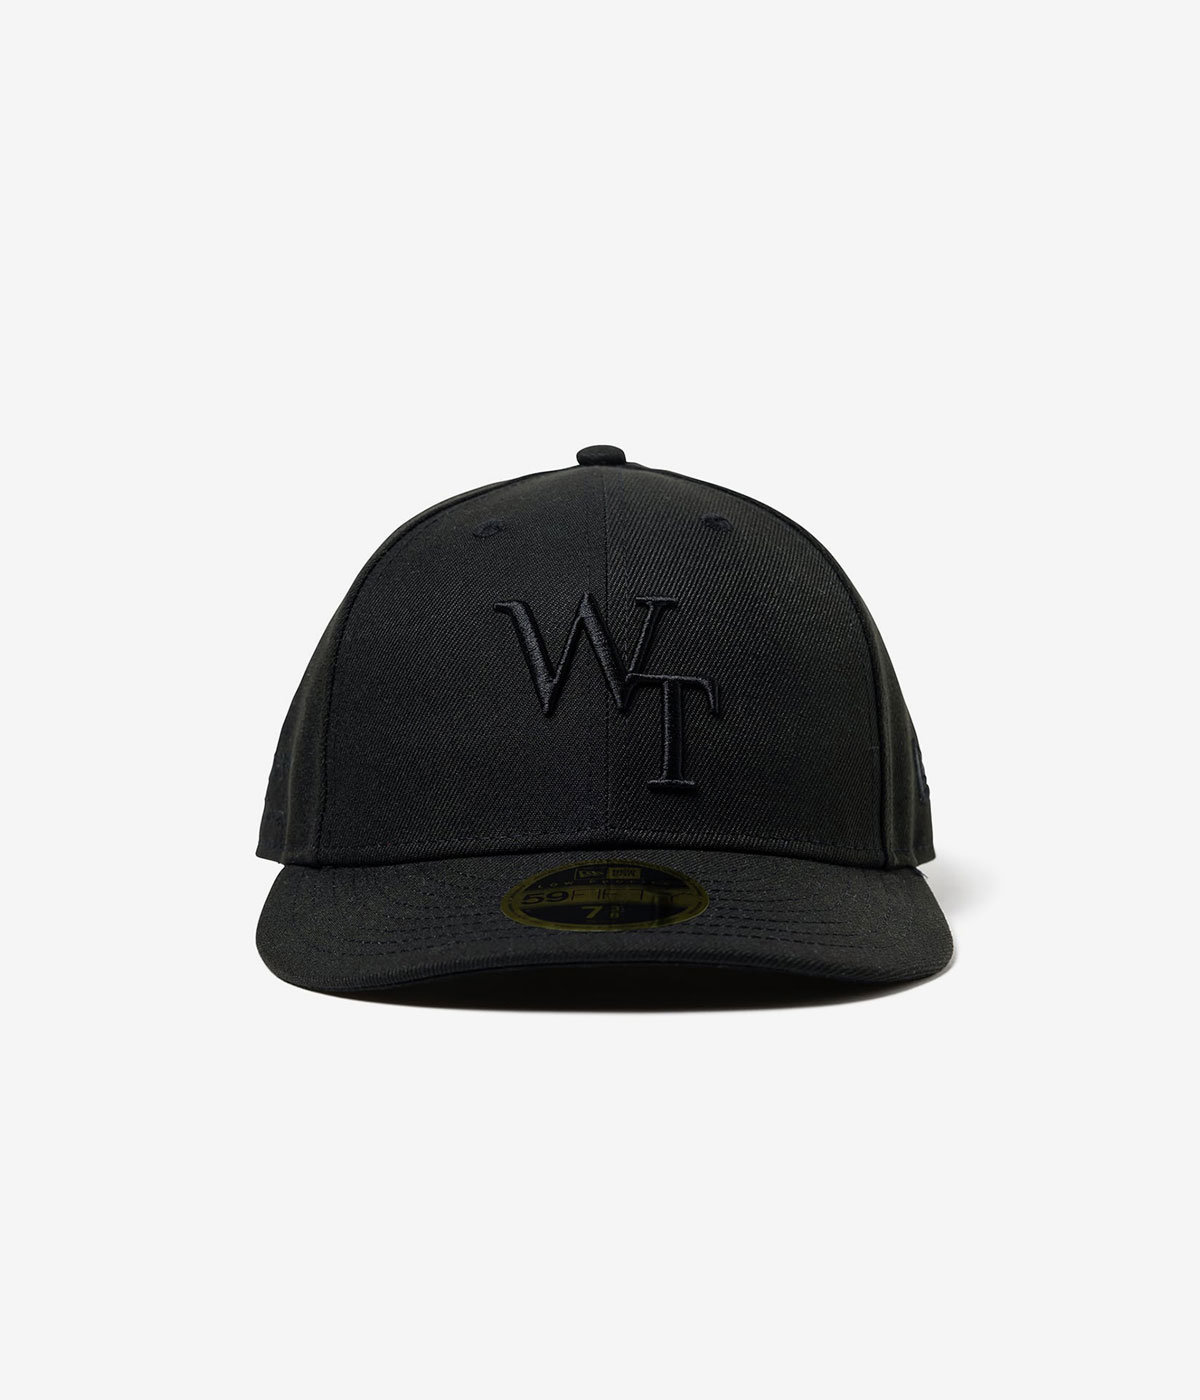 23aw wtaps NEWERA 59fifty low profile 3キャップ - キャップ